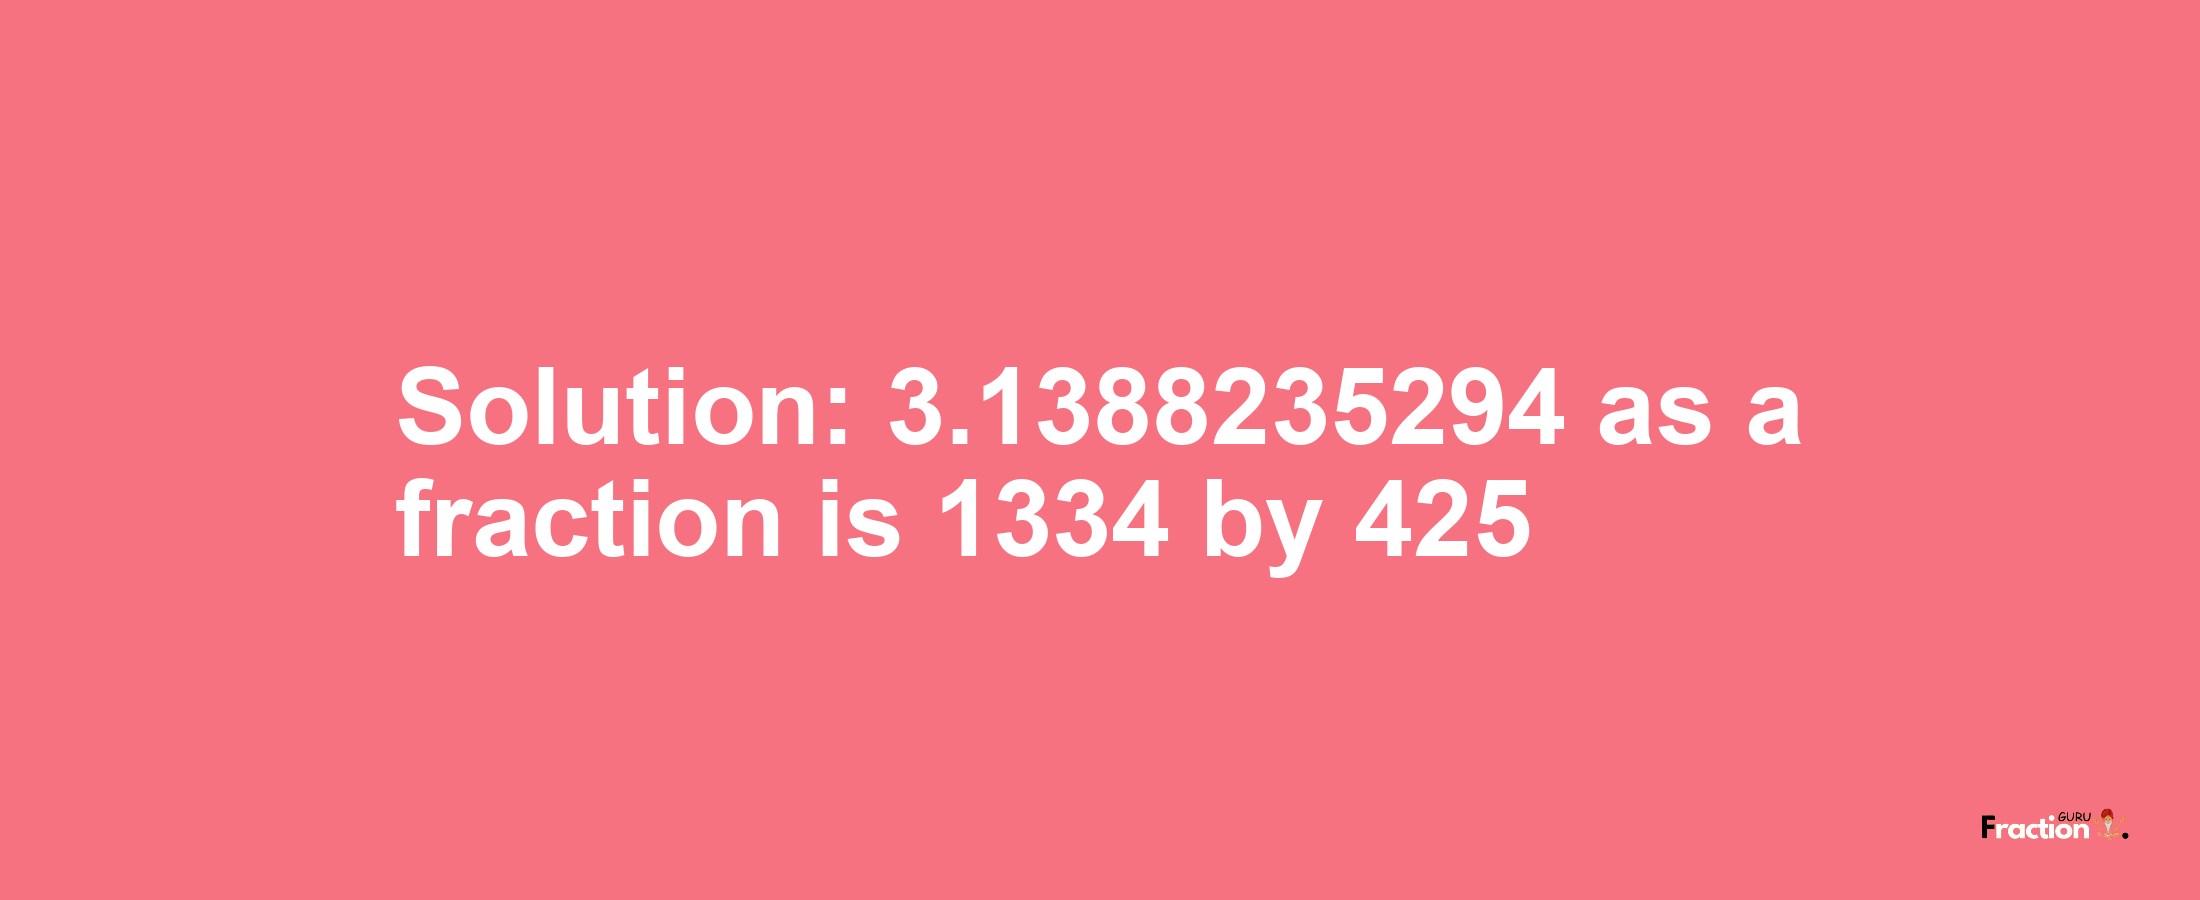 Solution:3.1388235294 as a fraction is 1334/425